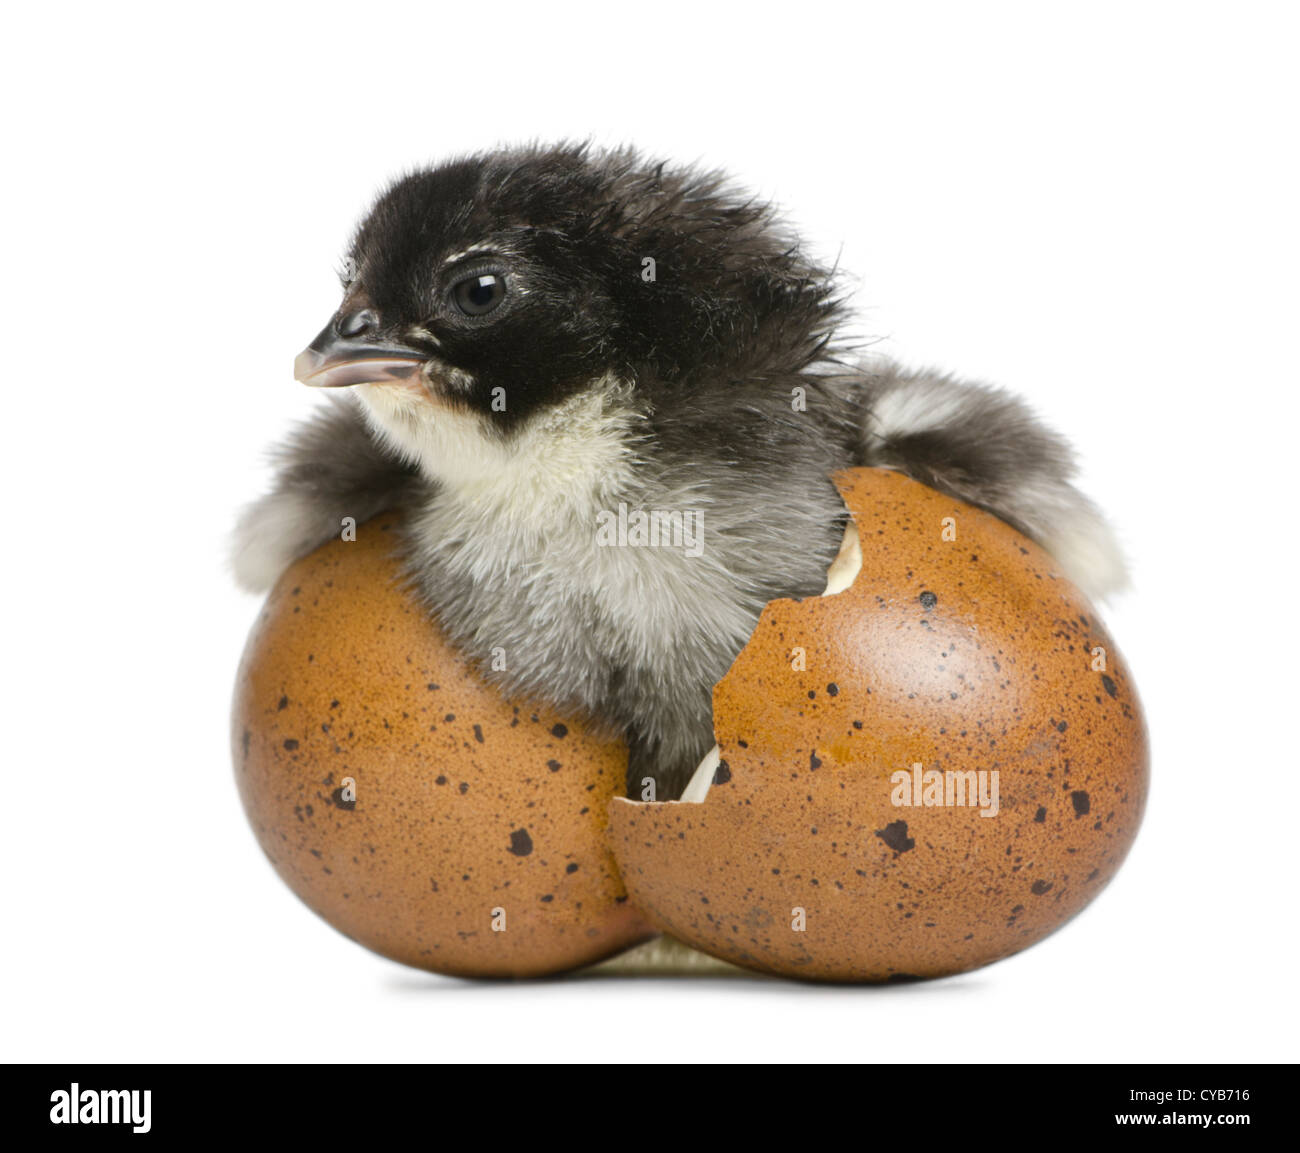 Marans chick, 15 hours old, standing in the egg from which he hatched against white background Stock Photo